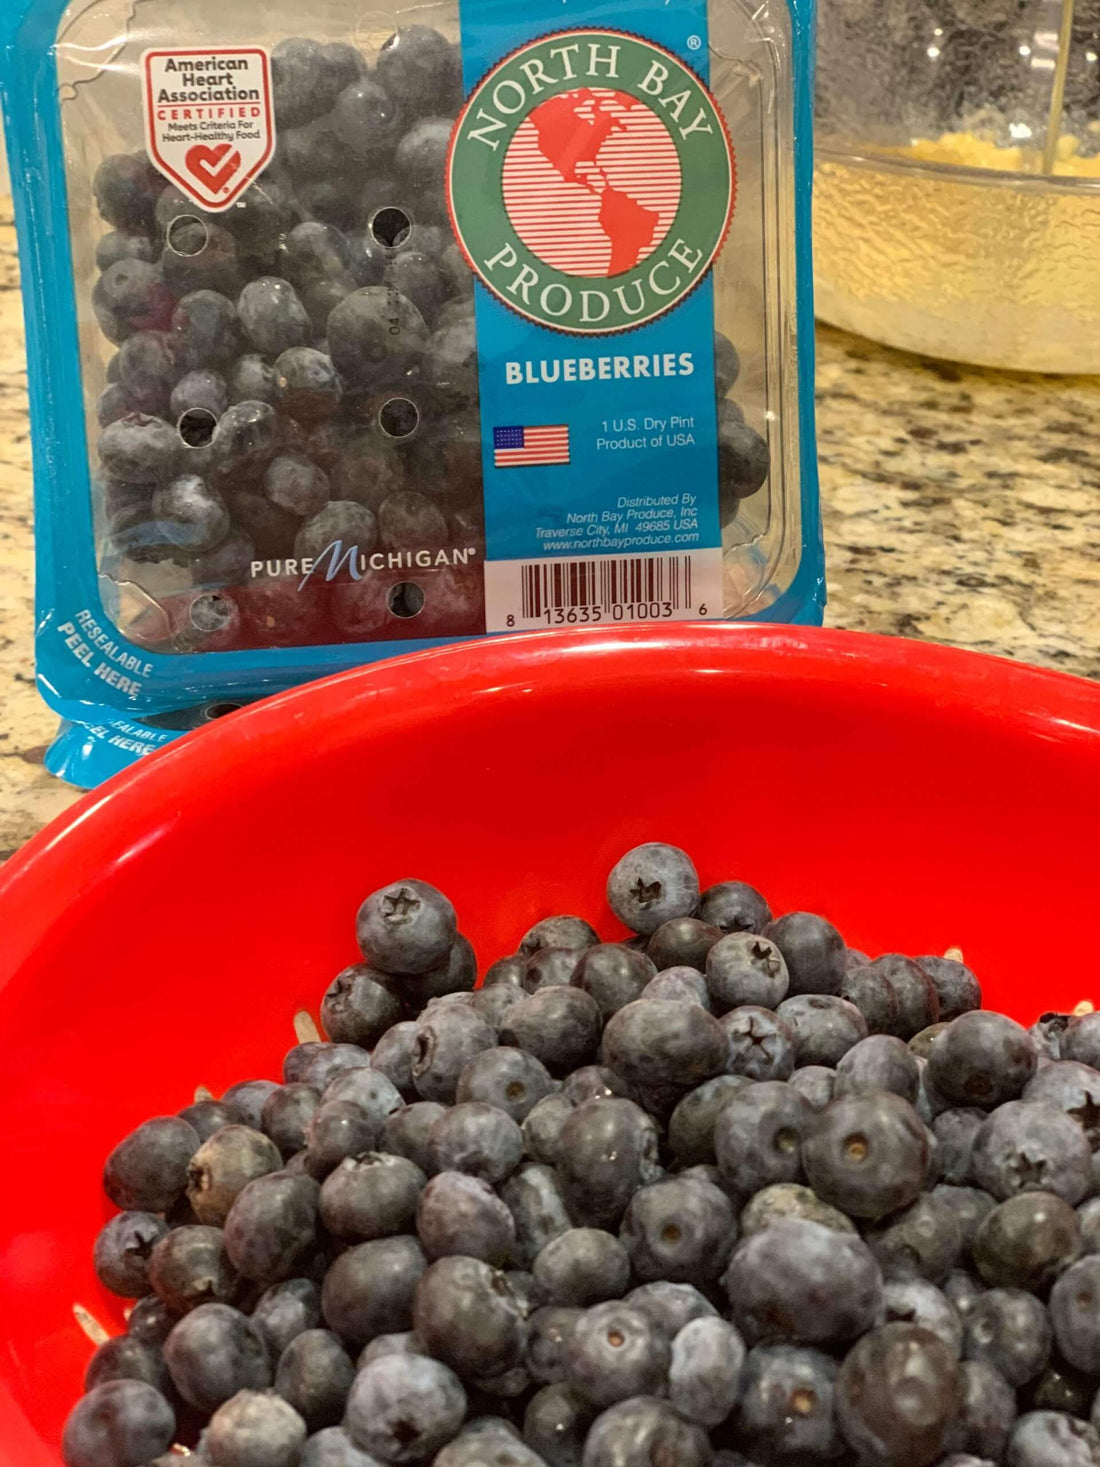 Celebrating Back-To-School Season with Blueberry and Apple Recipes on Indy Style